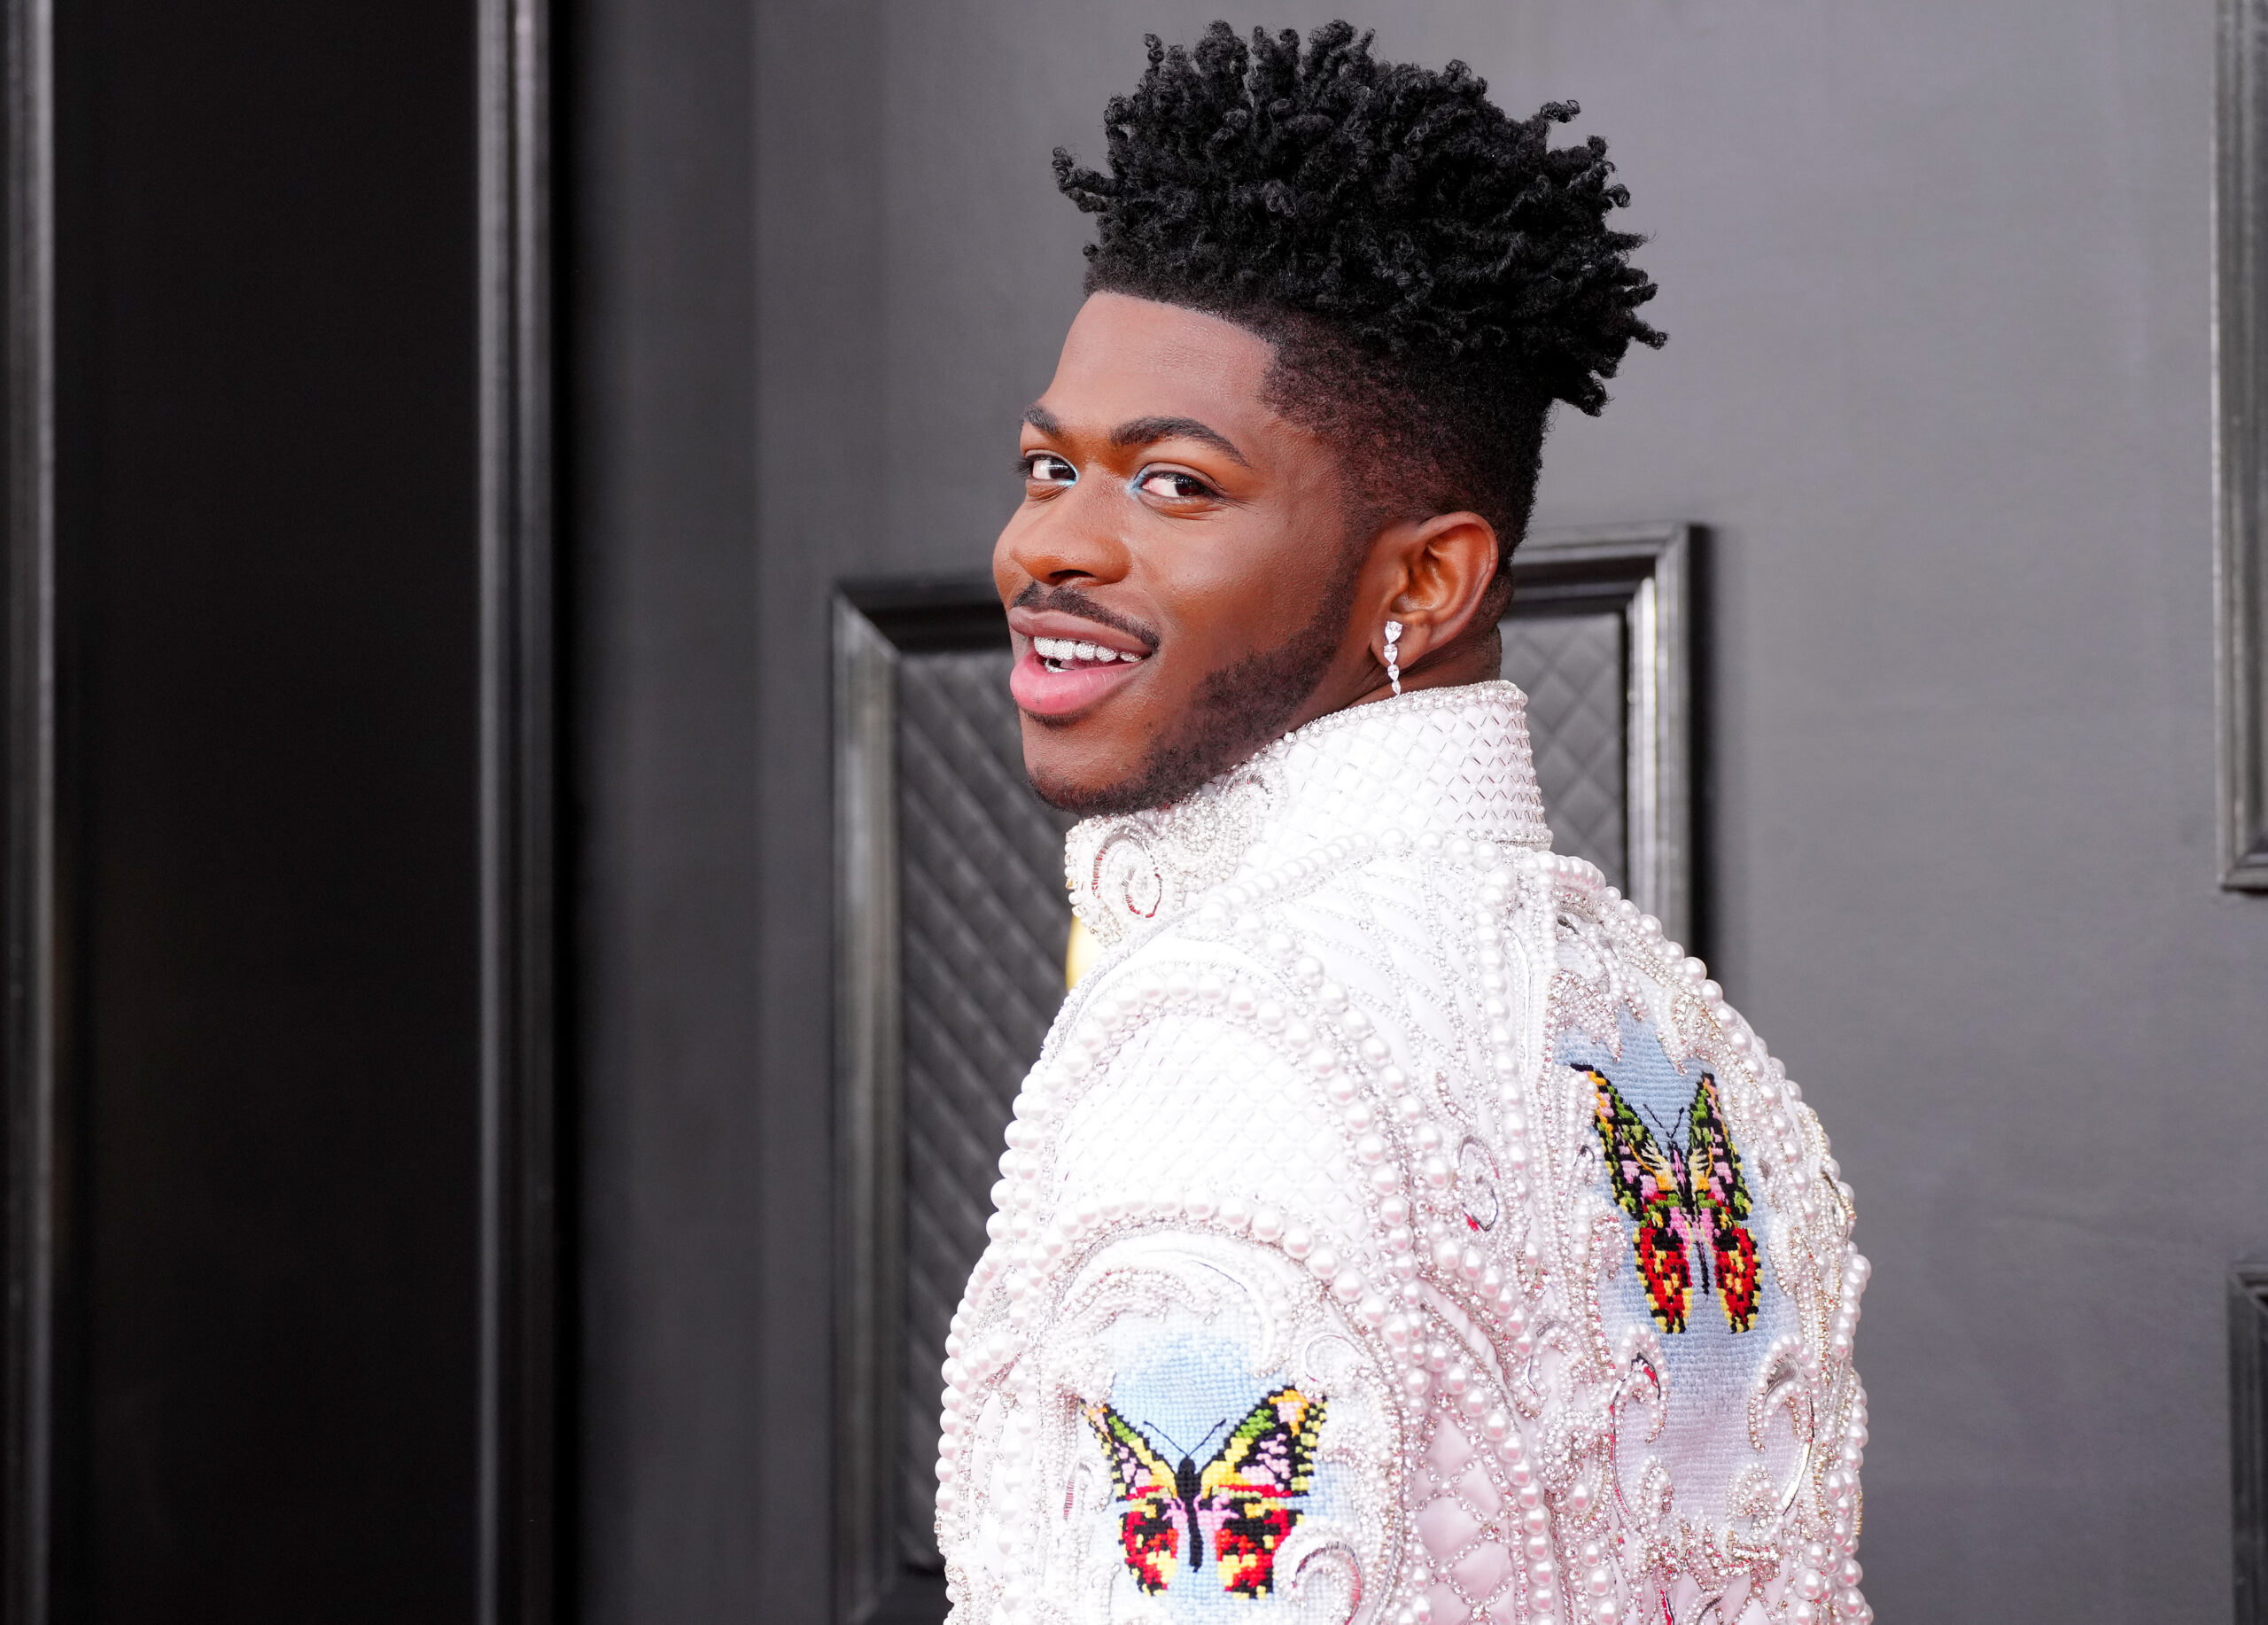 Lil Nas X “Inspired” After “Long Live Montero” Premiere Bomb Threat